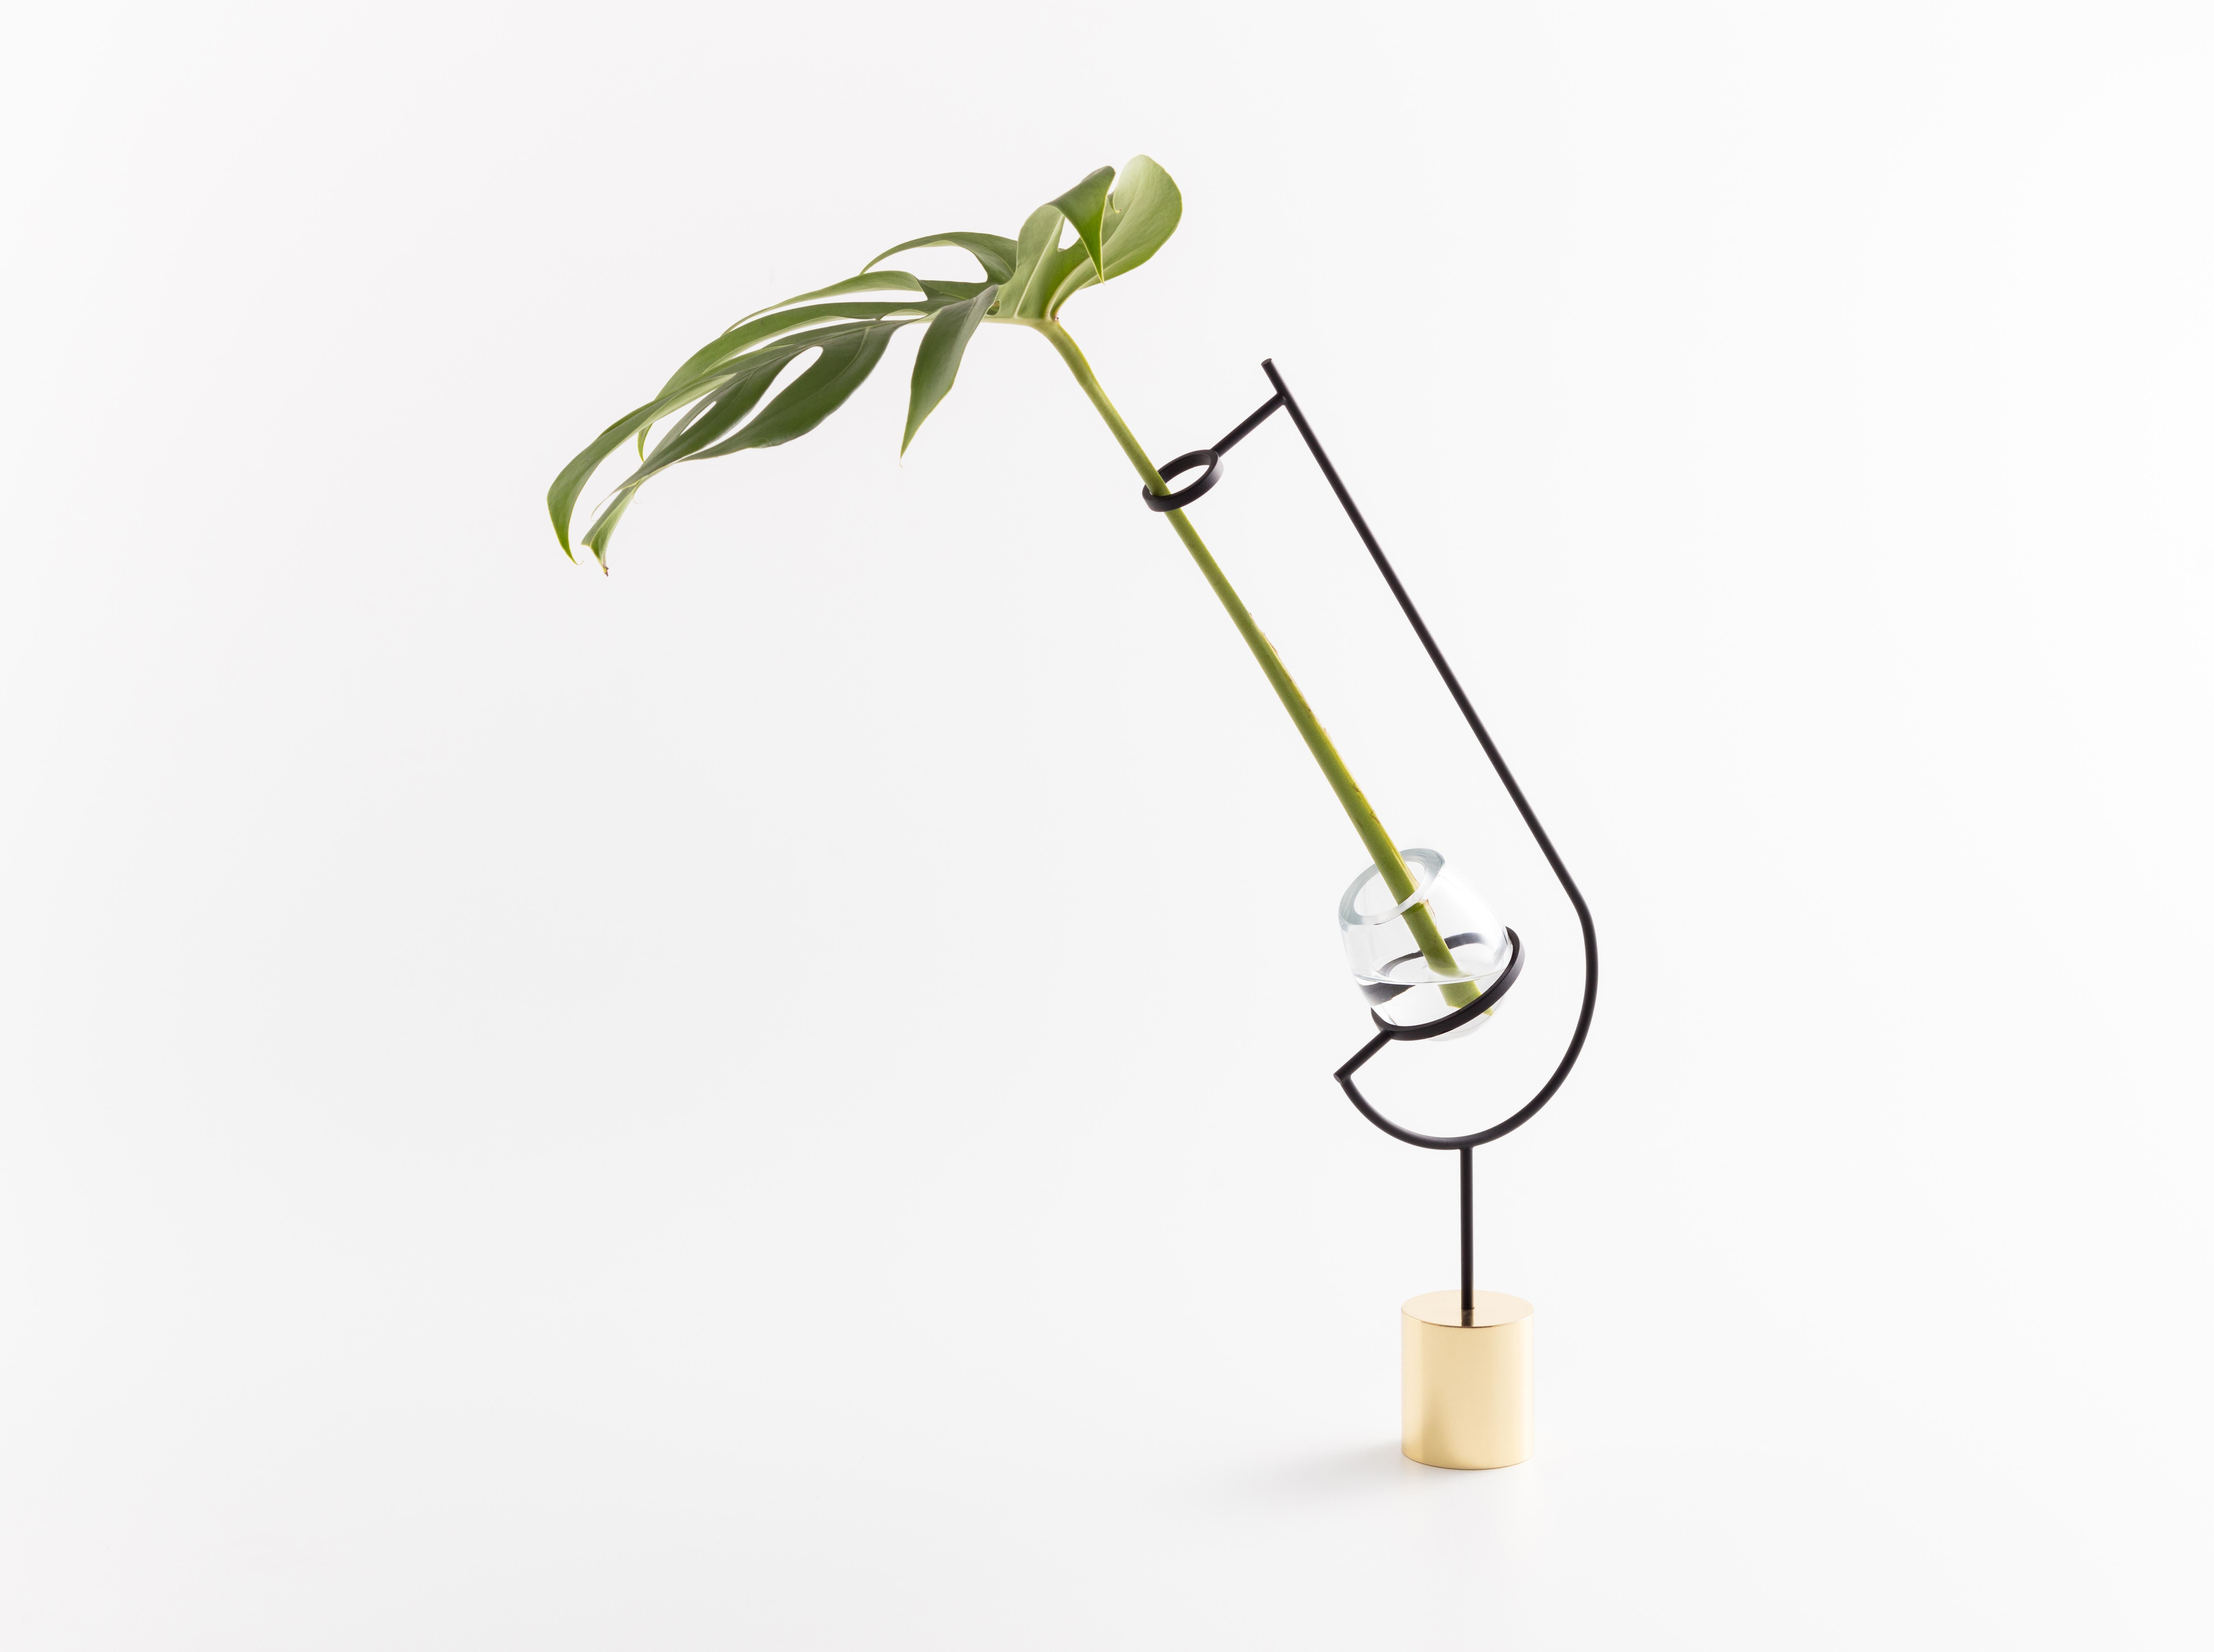 V3 vase - Monstera by Paulo Goldstein, Brazilian contemporary design is part of a series of vases inspired in the observation of the natural lines of the flowers and leaves held in them, where the lines of the vases were designed to enhance and